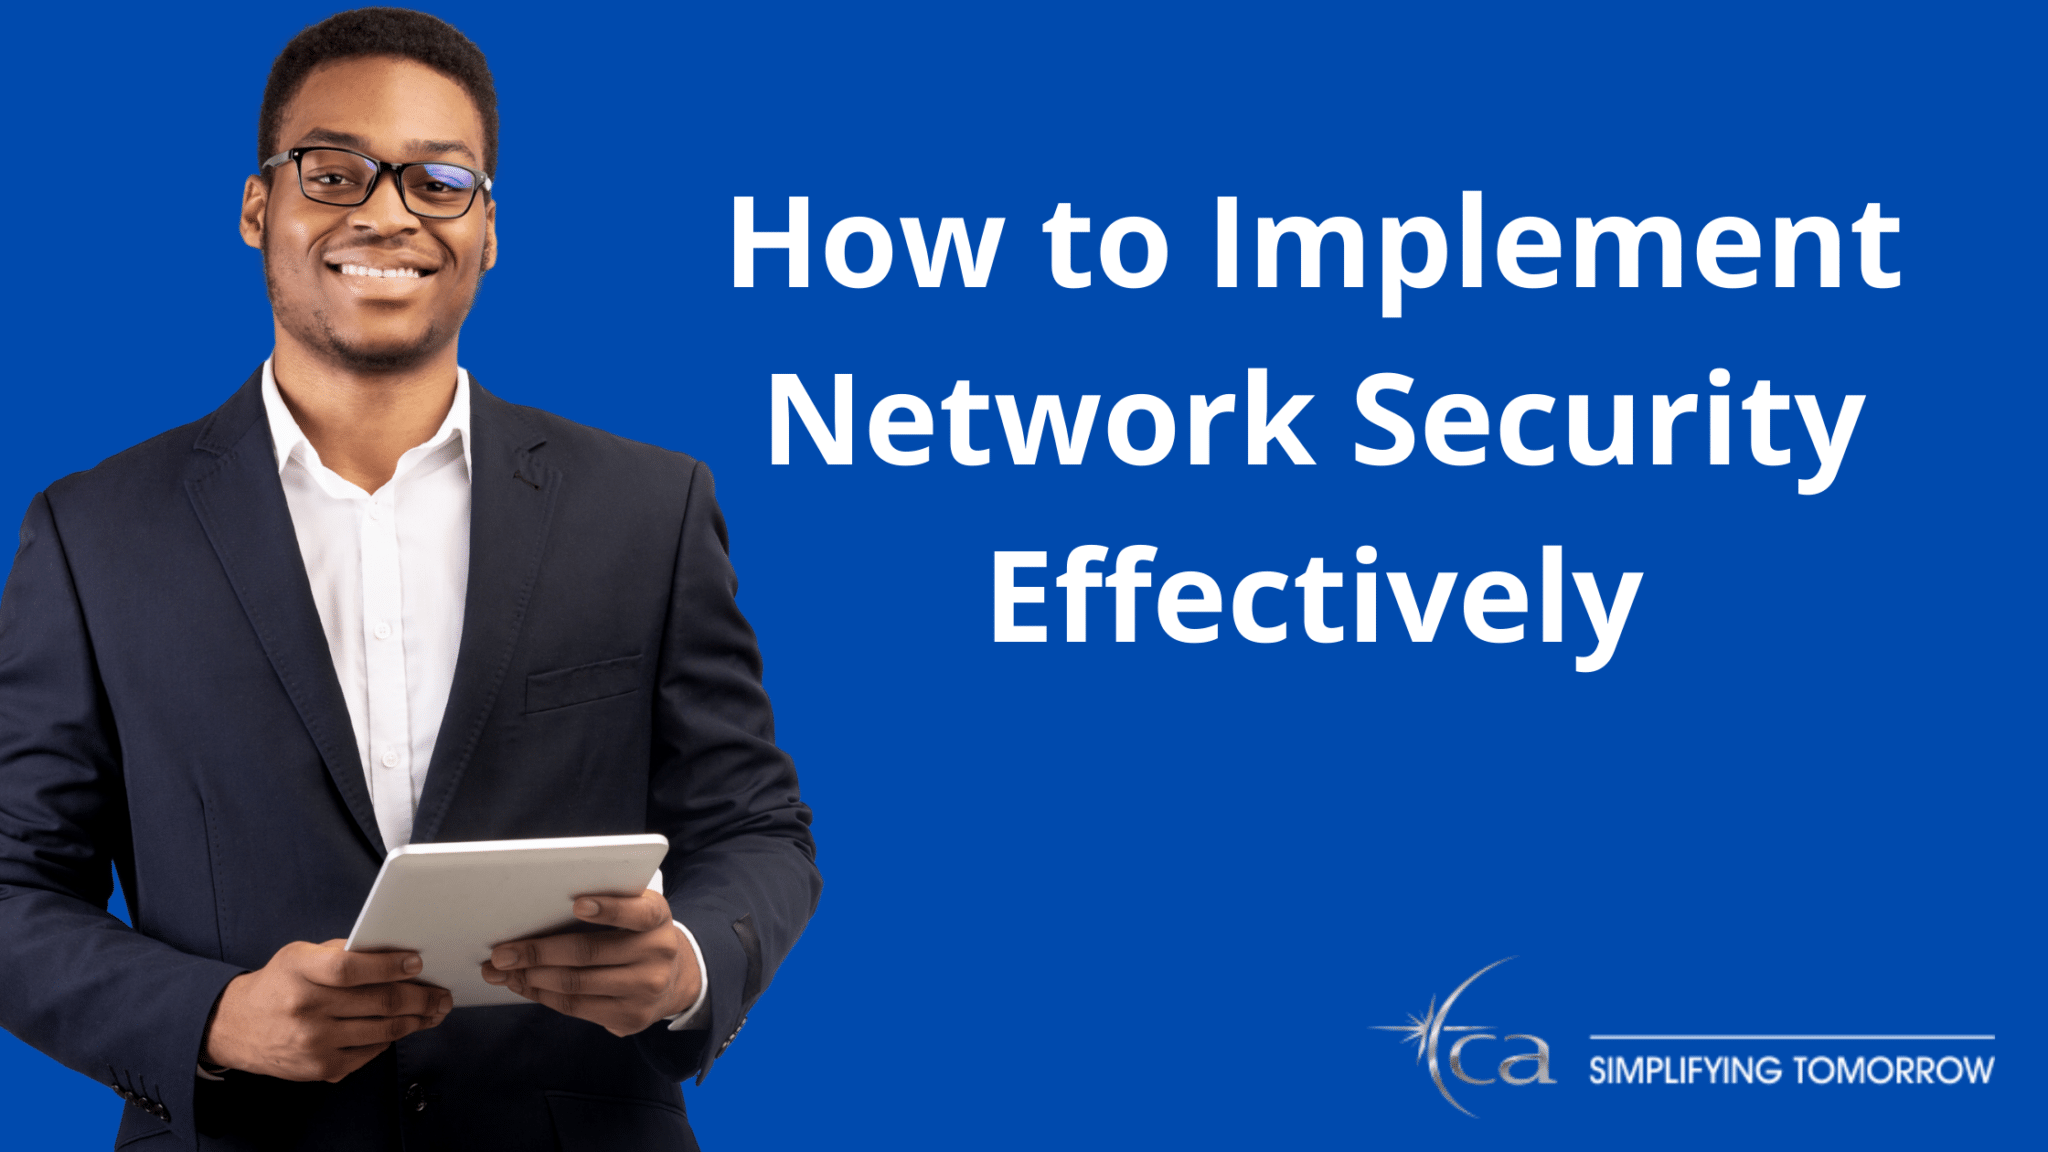 How to Implement Network Security Effectively